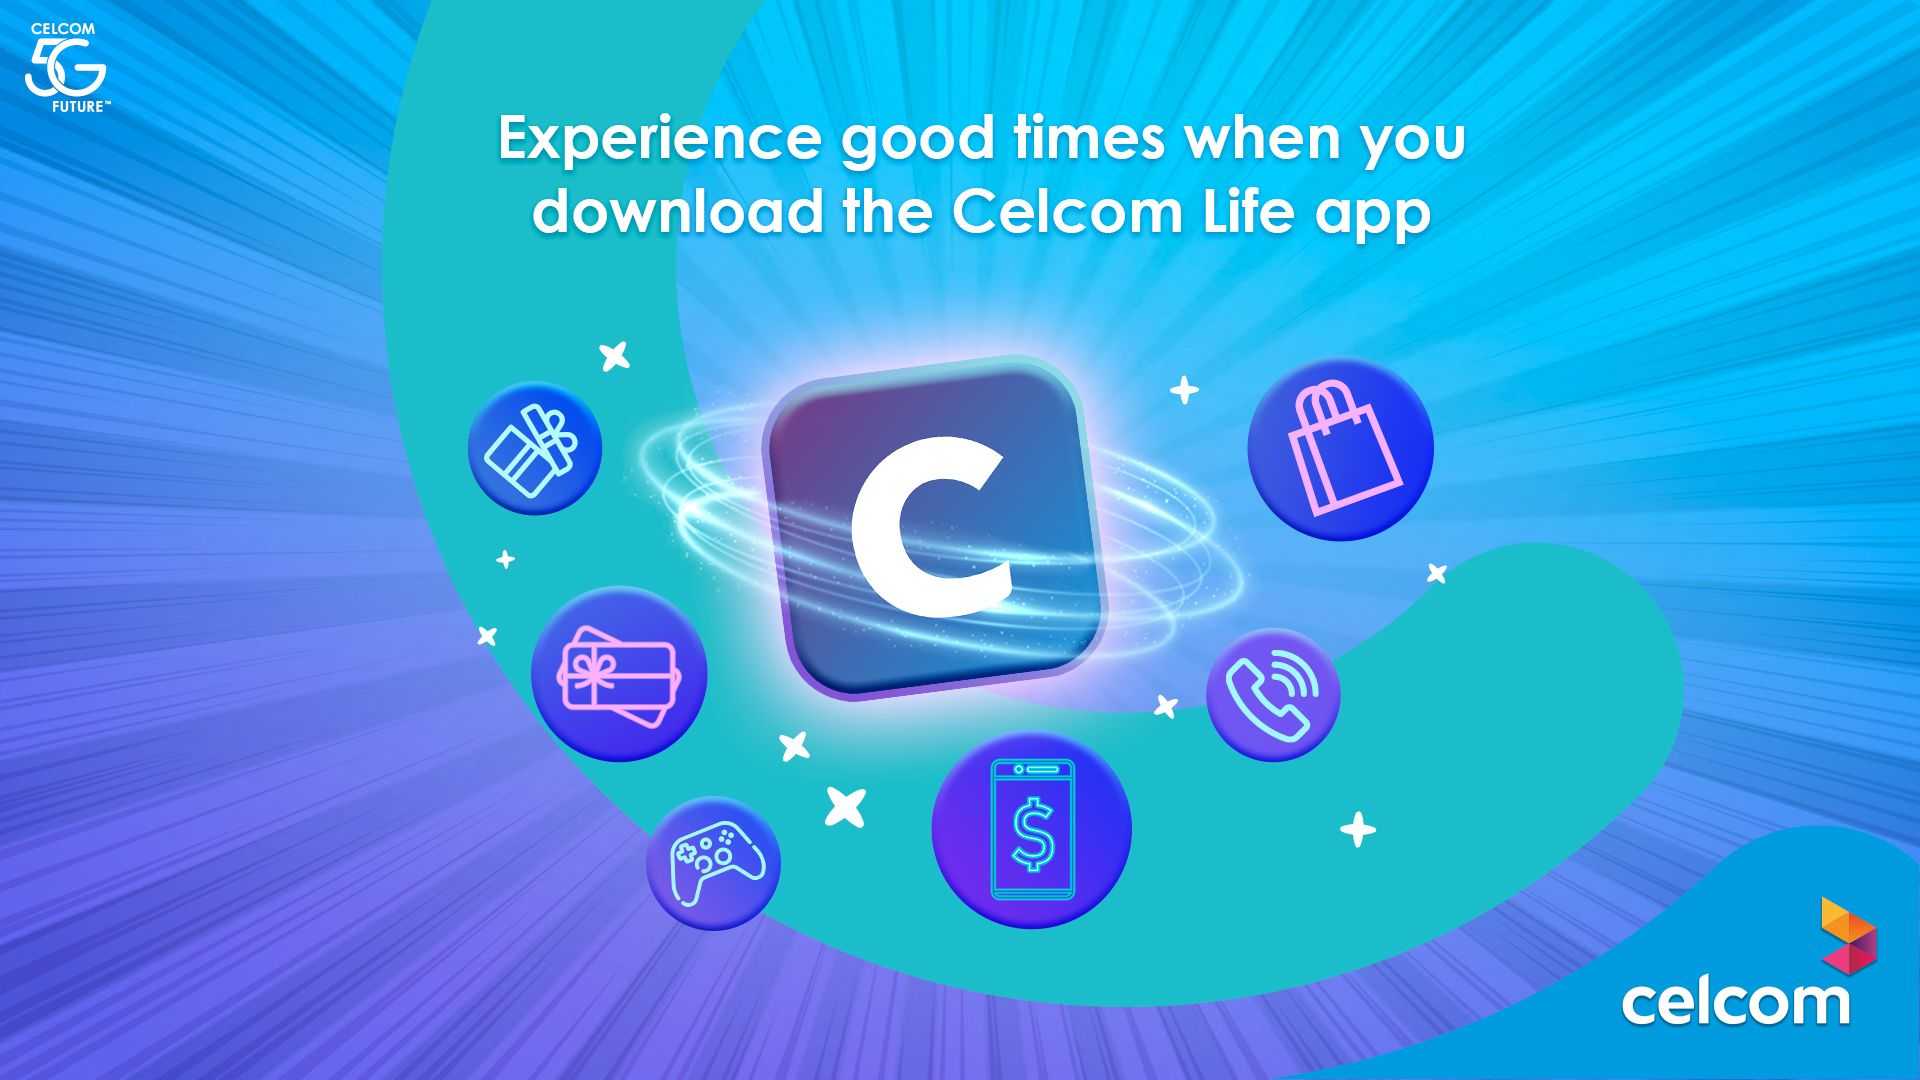 Celcom Life 3.0: A revamp project intended to kill 3 birds with one stone